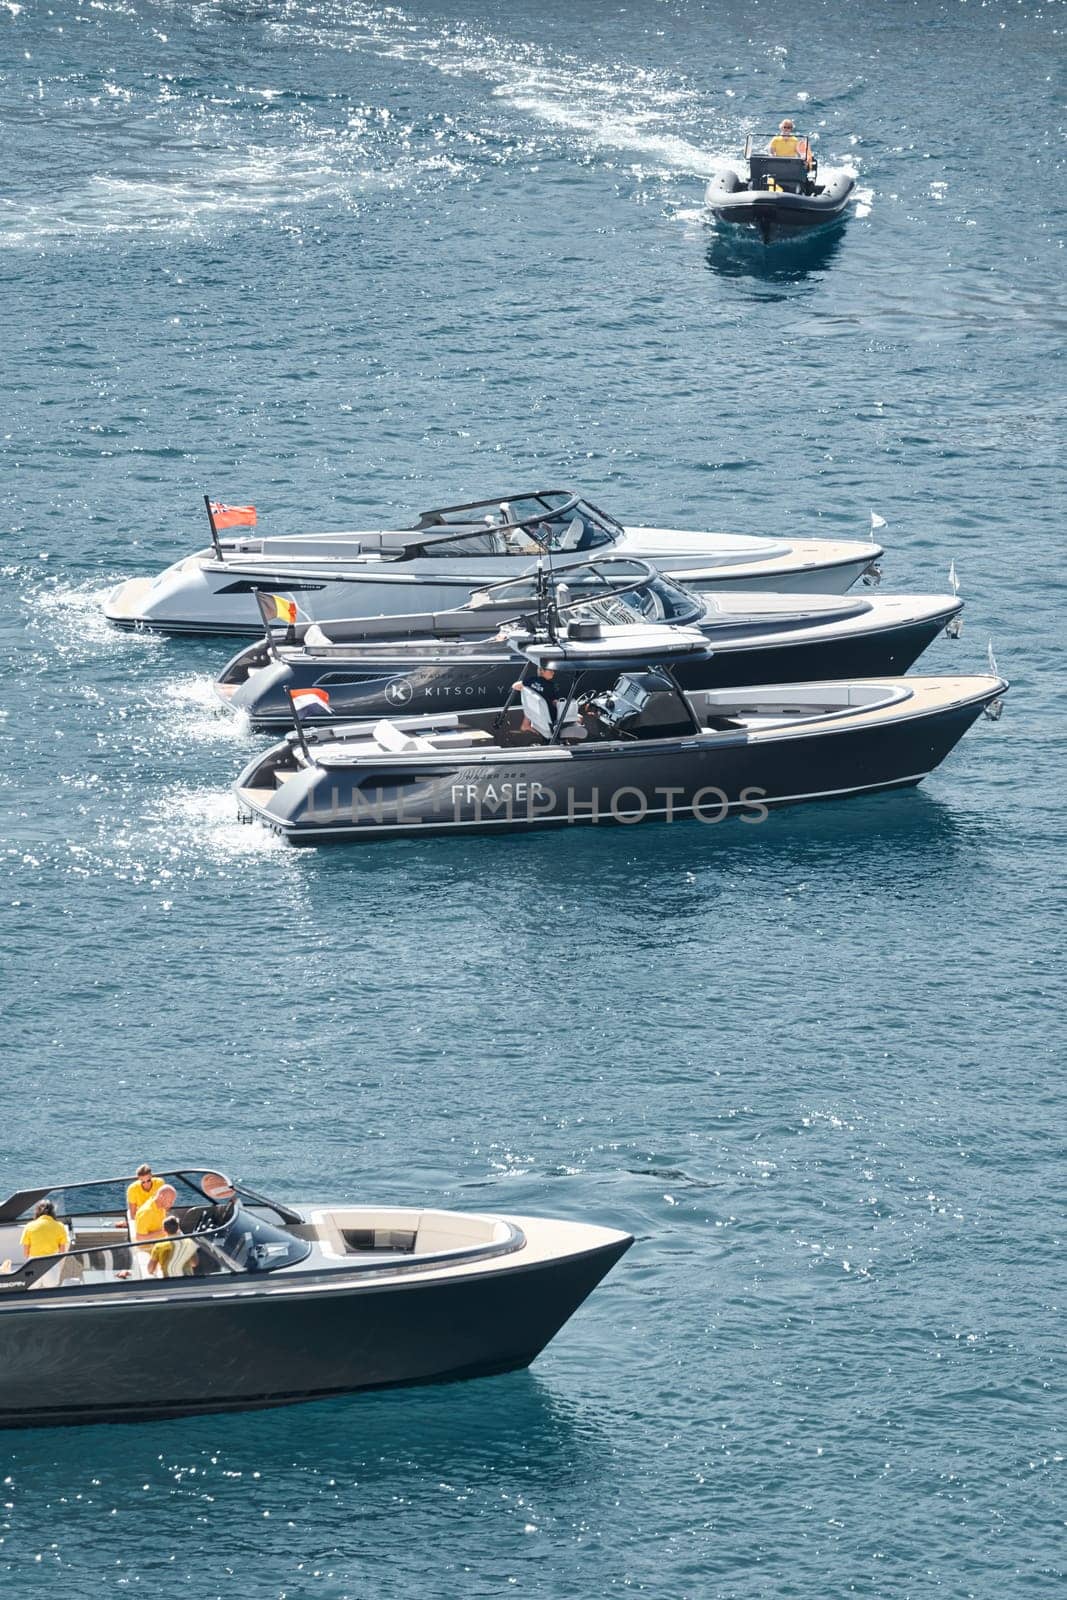 Monaco, Monte Carlo, 27 September 2022 - a boat with guests of yacht brokers departs from the shore in the largest fair exhibition in the world yacht show MYS, port Hercules, rich clients, sunny by vladimirdrozdin